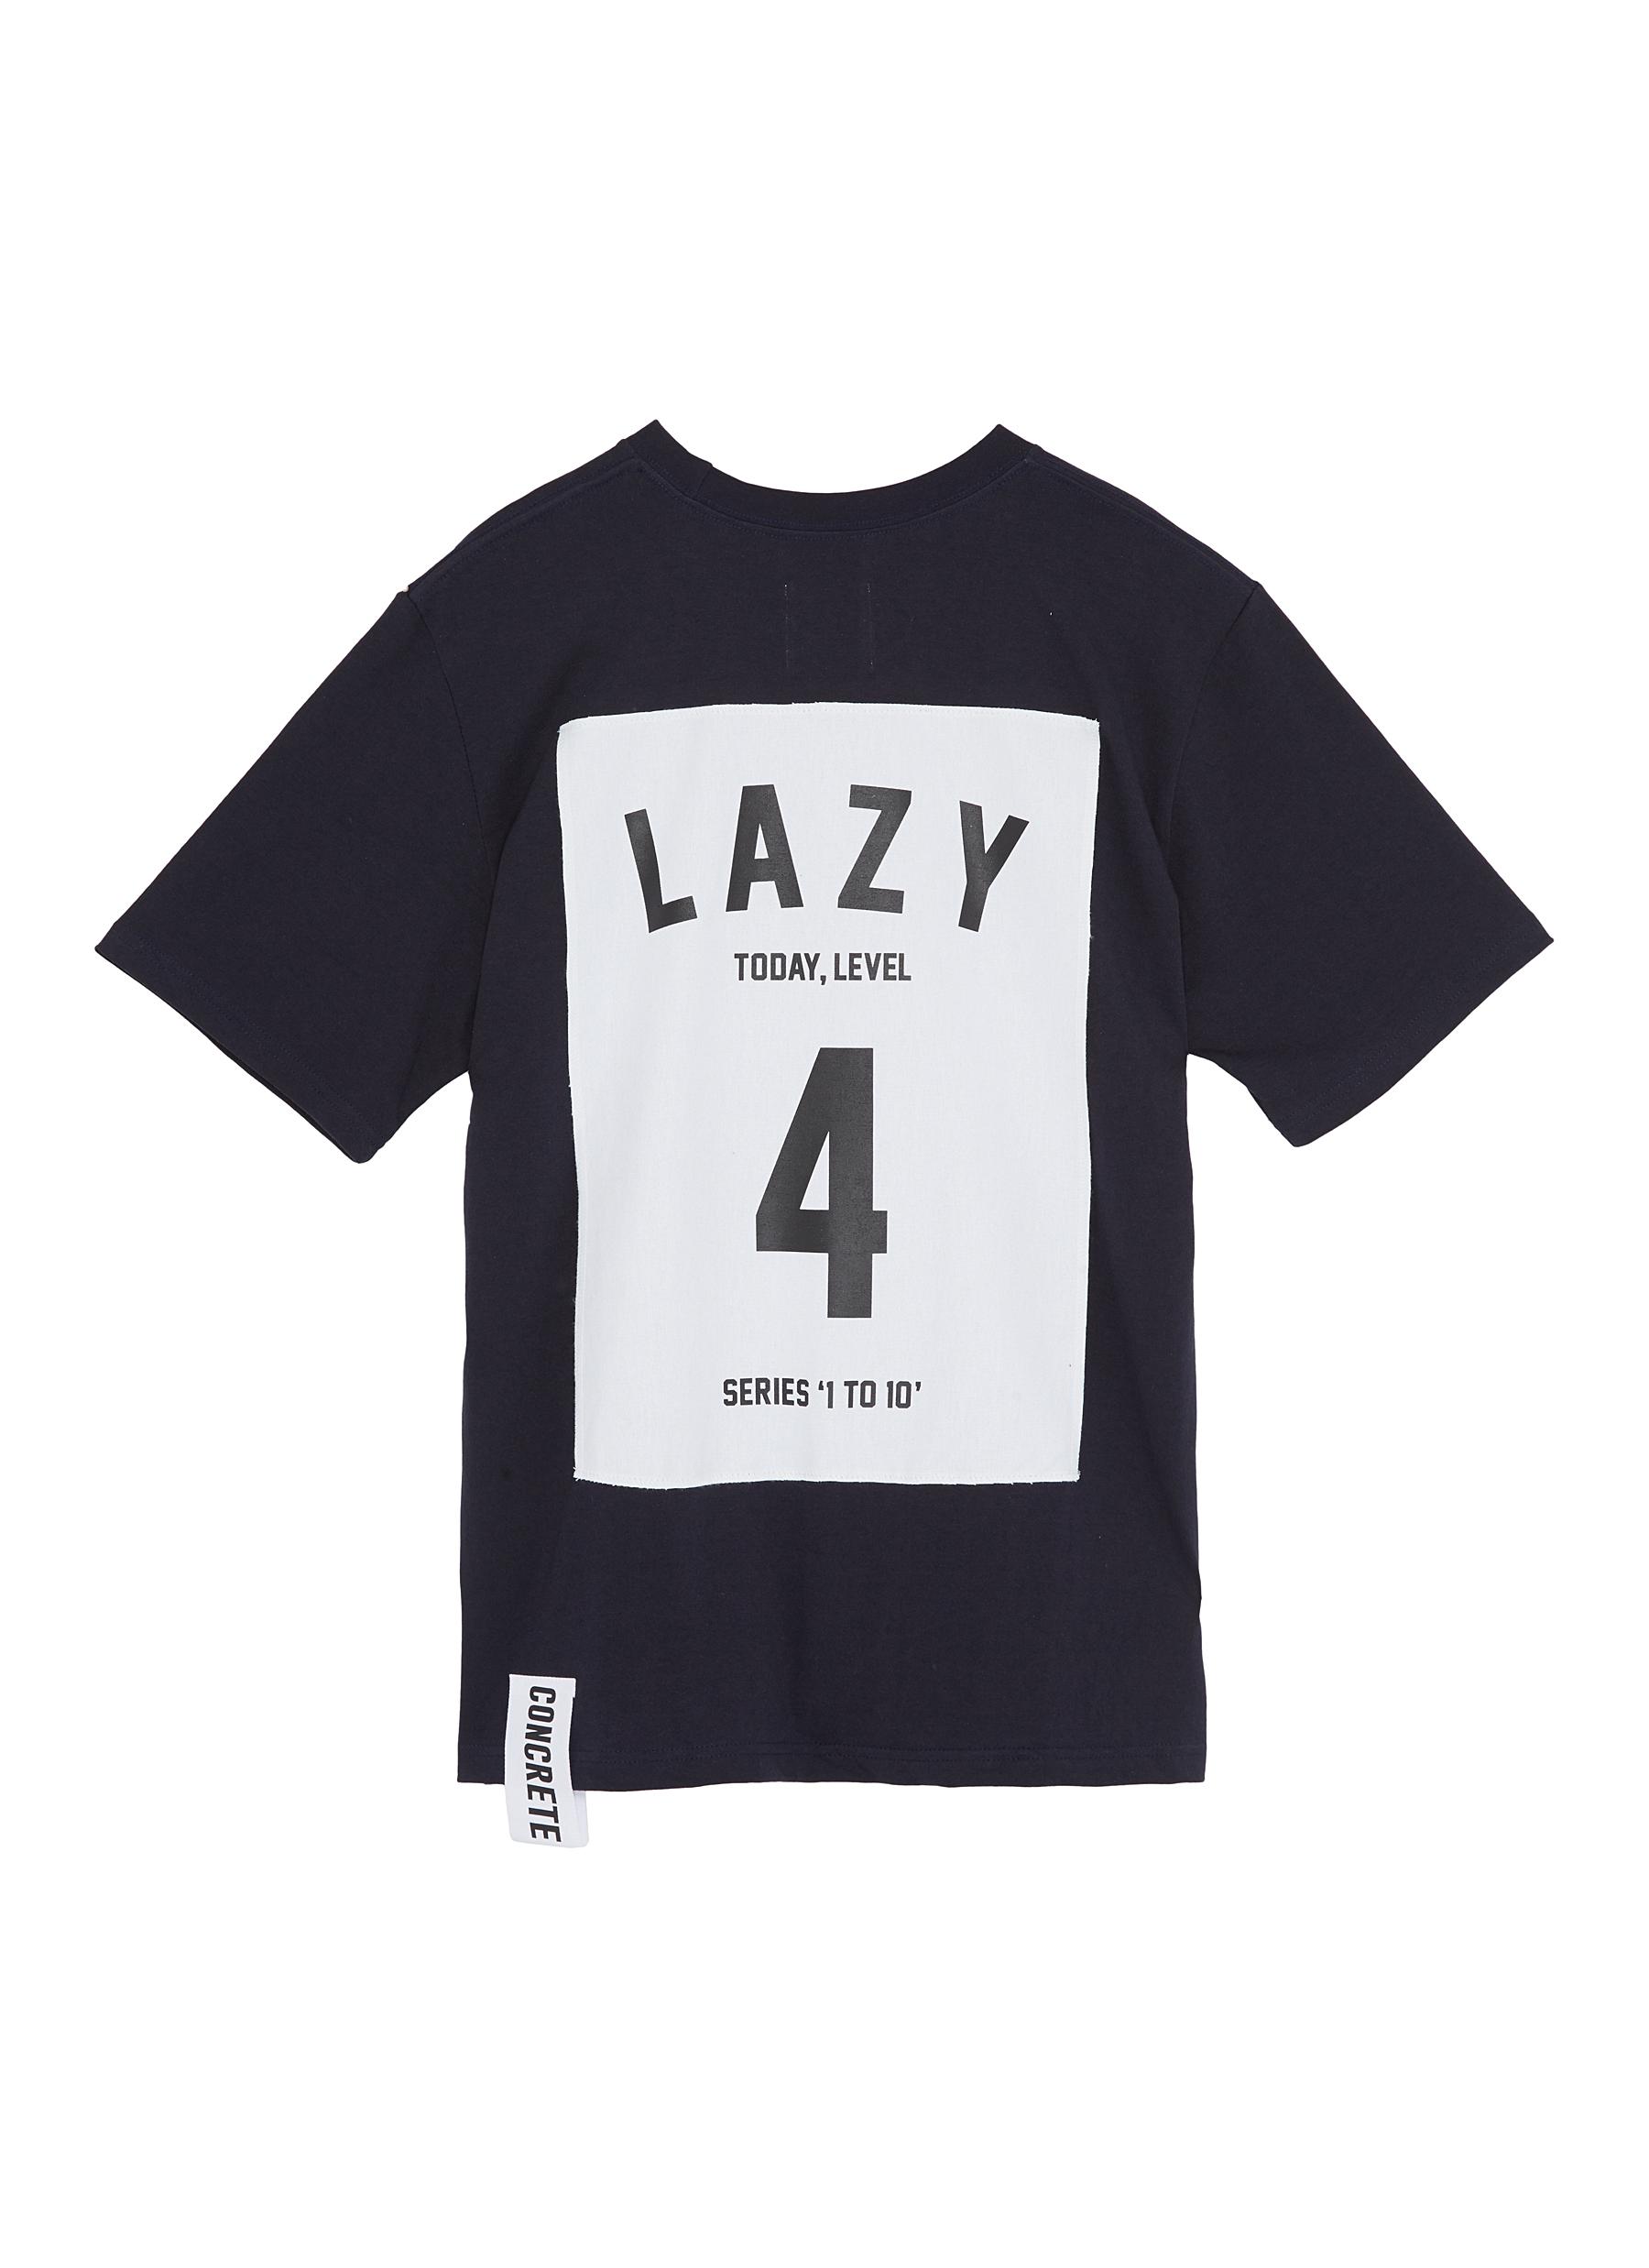 Series 1 to 10 oversized unisex T-shirt - 4 Lazy by Studio Concrete